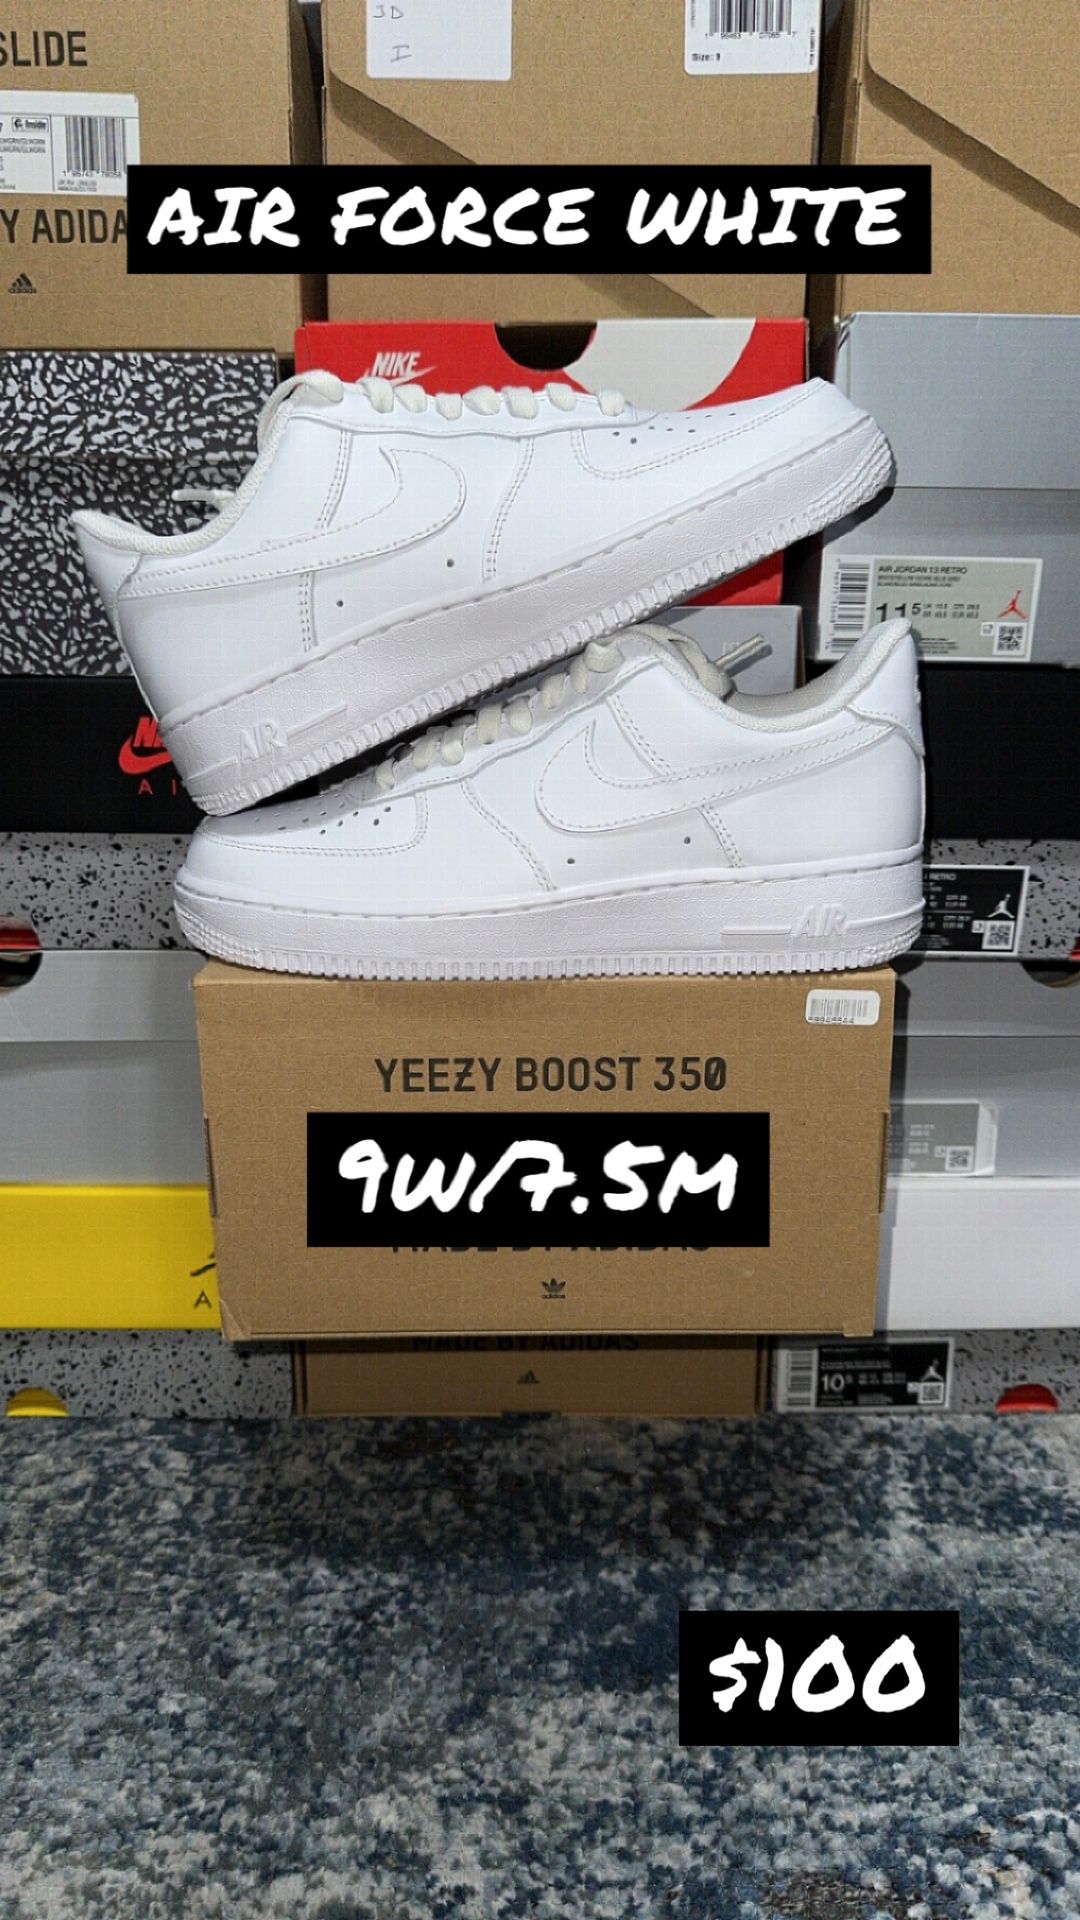 Air Force White Size 9w/7.5m